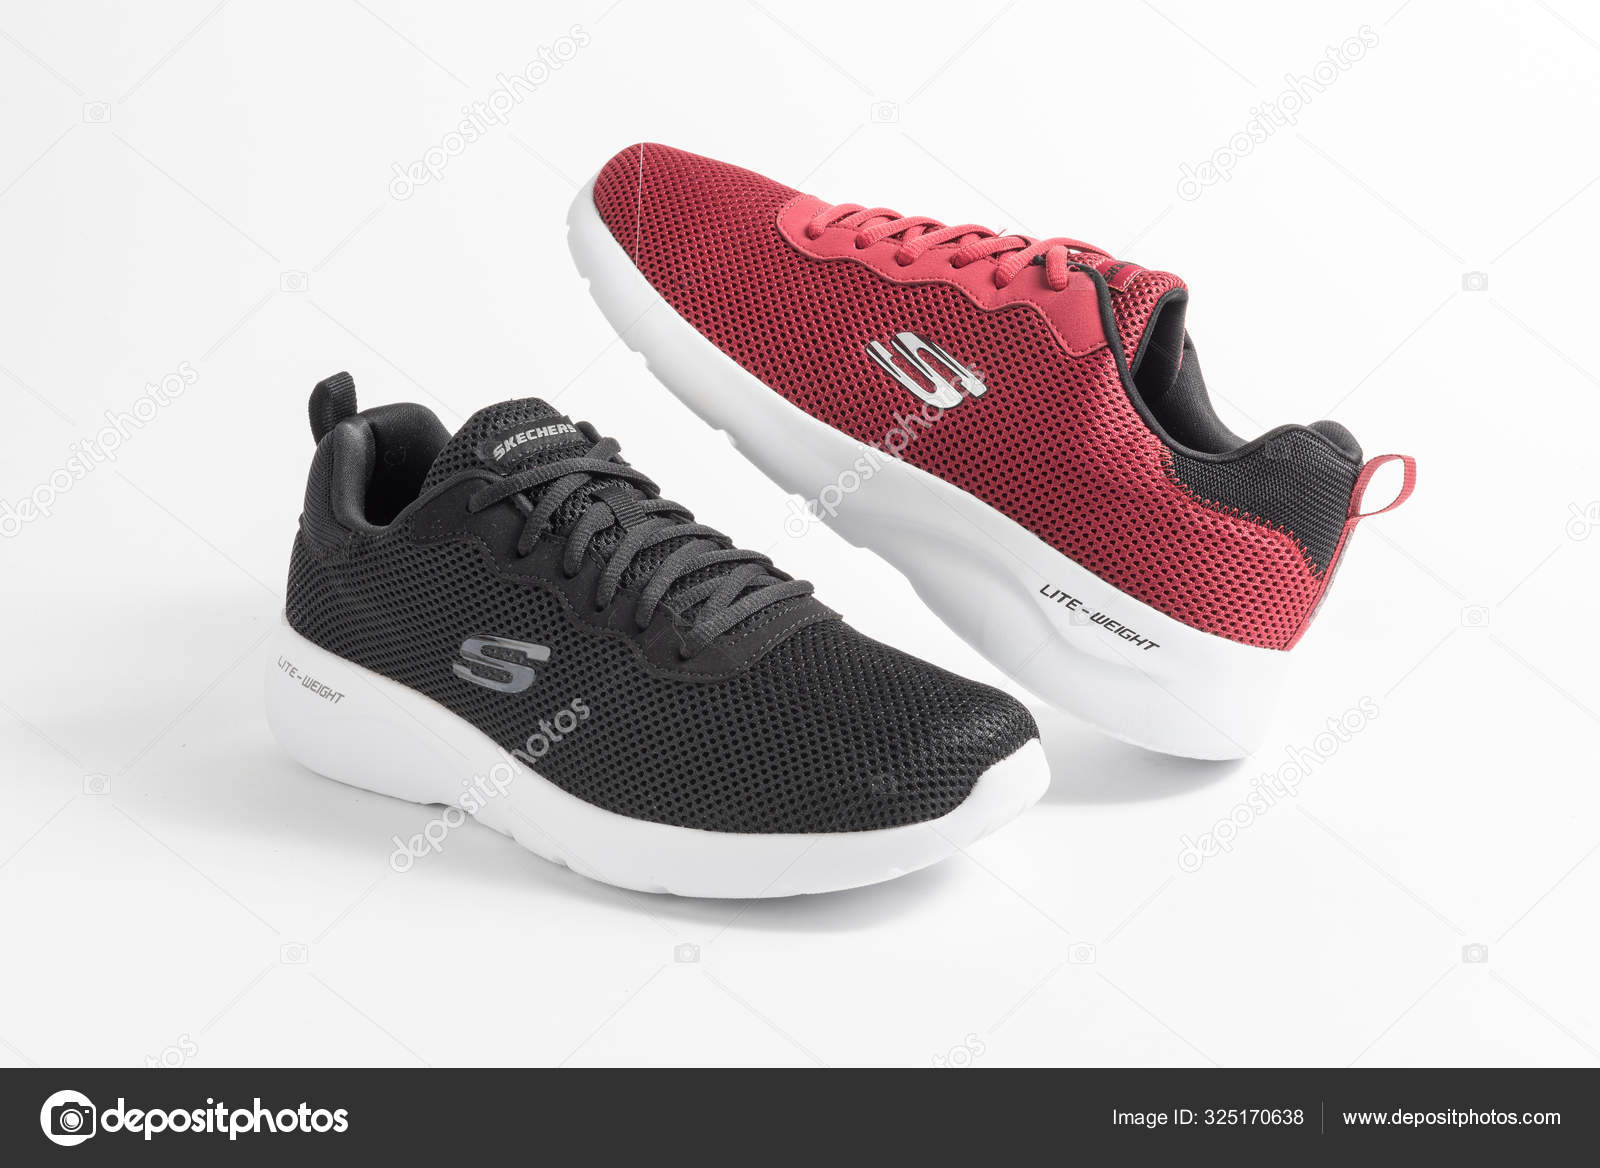 pictures of skechers shoes